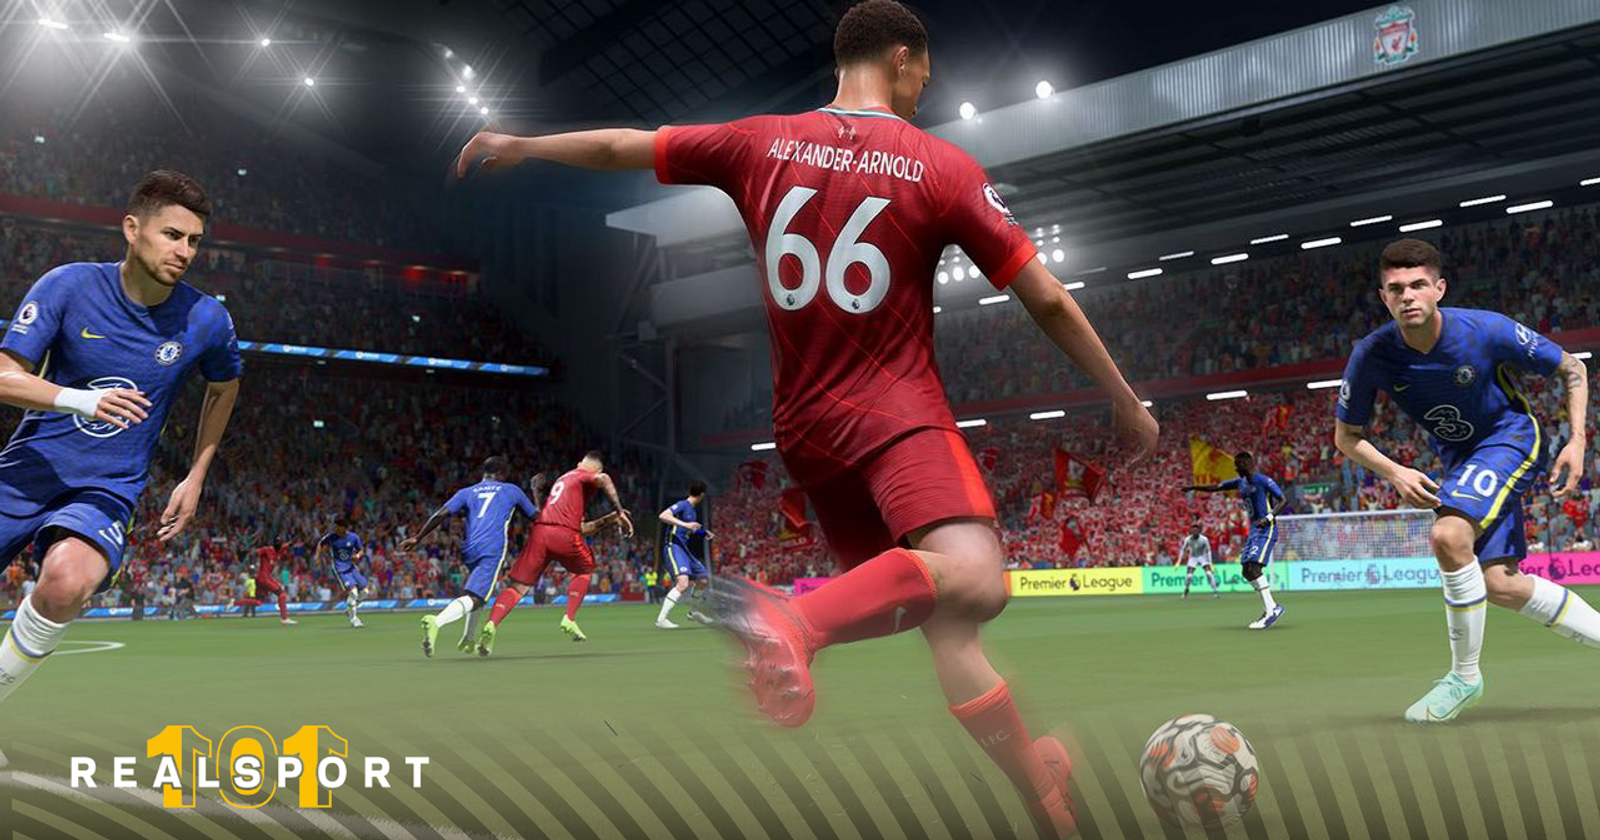 FIFA 23: Release Dates - EA Play Trial and Ultimate Edition Early